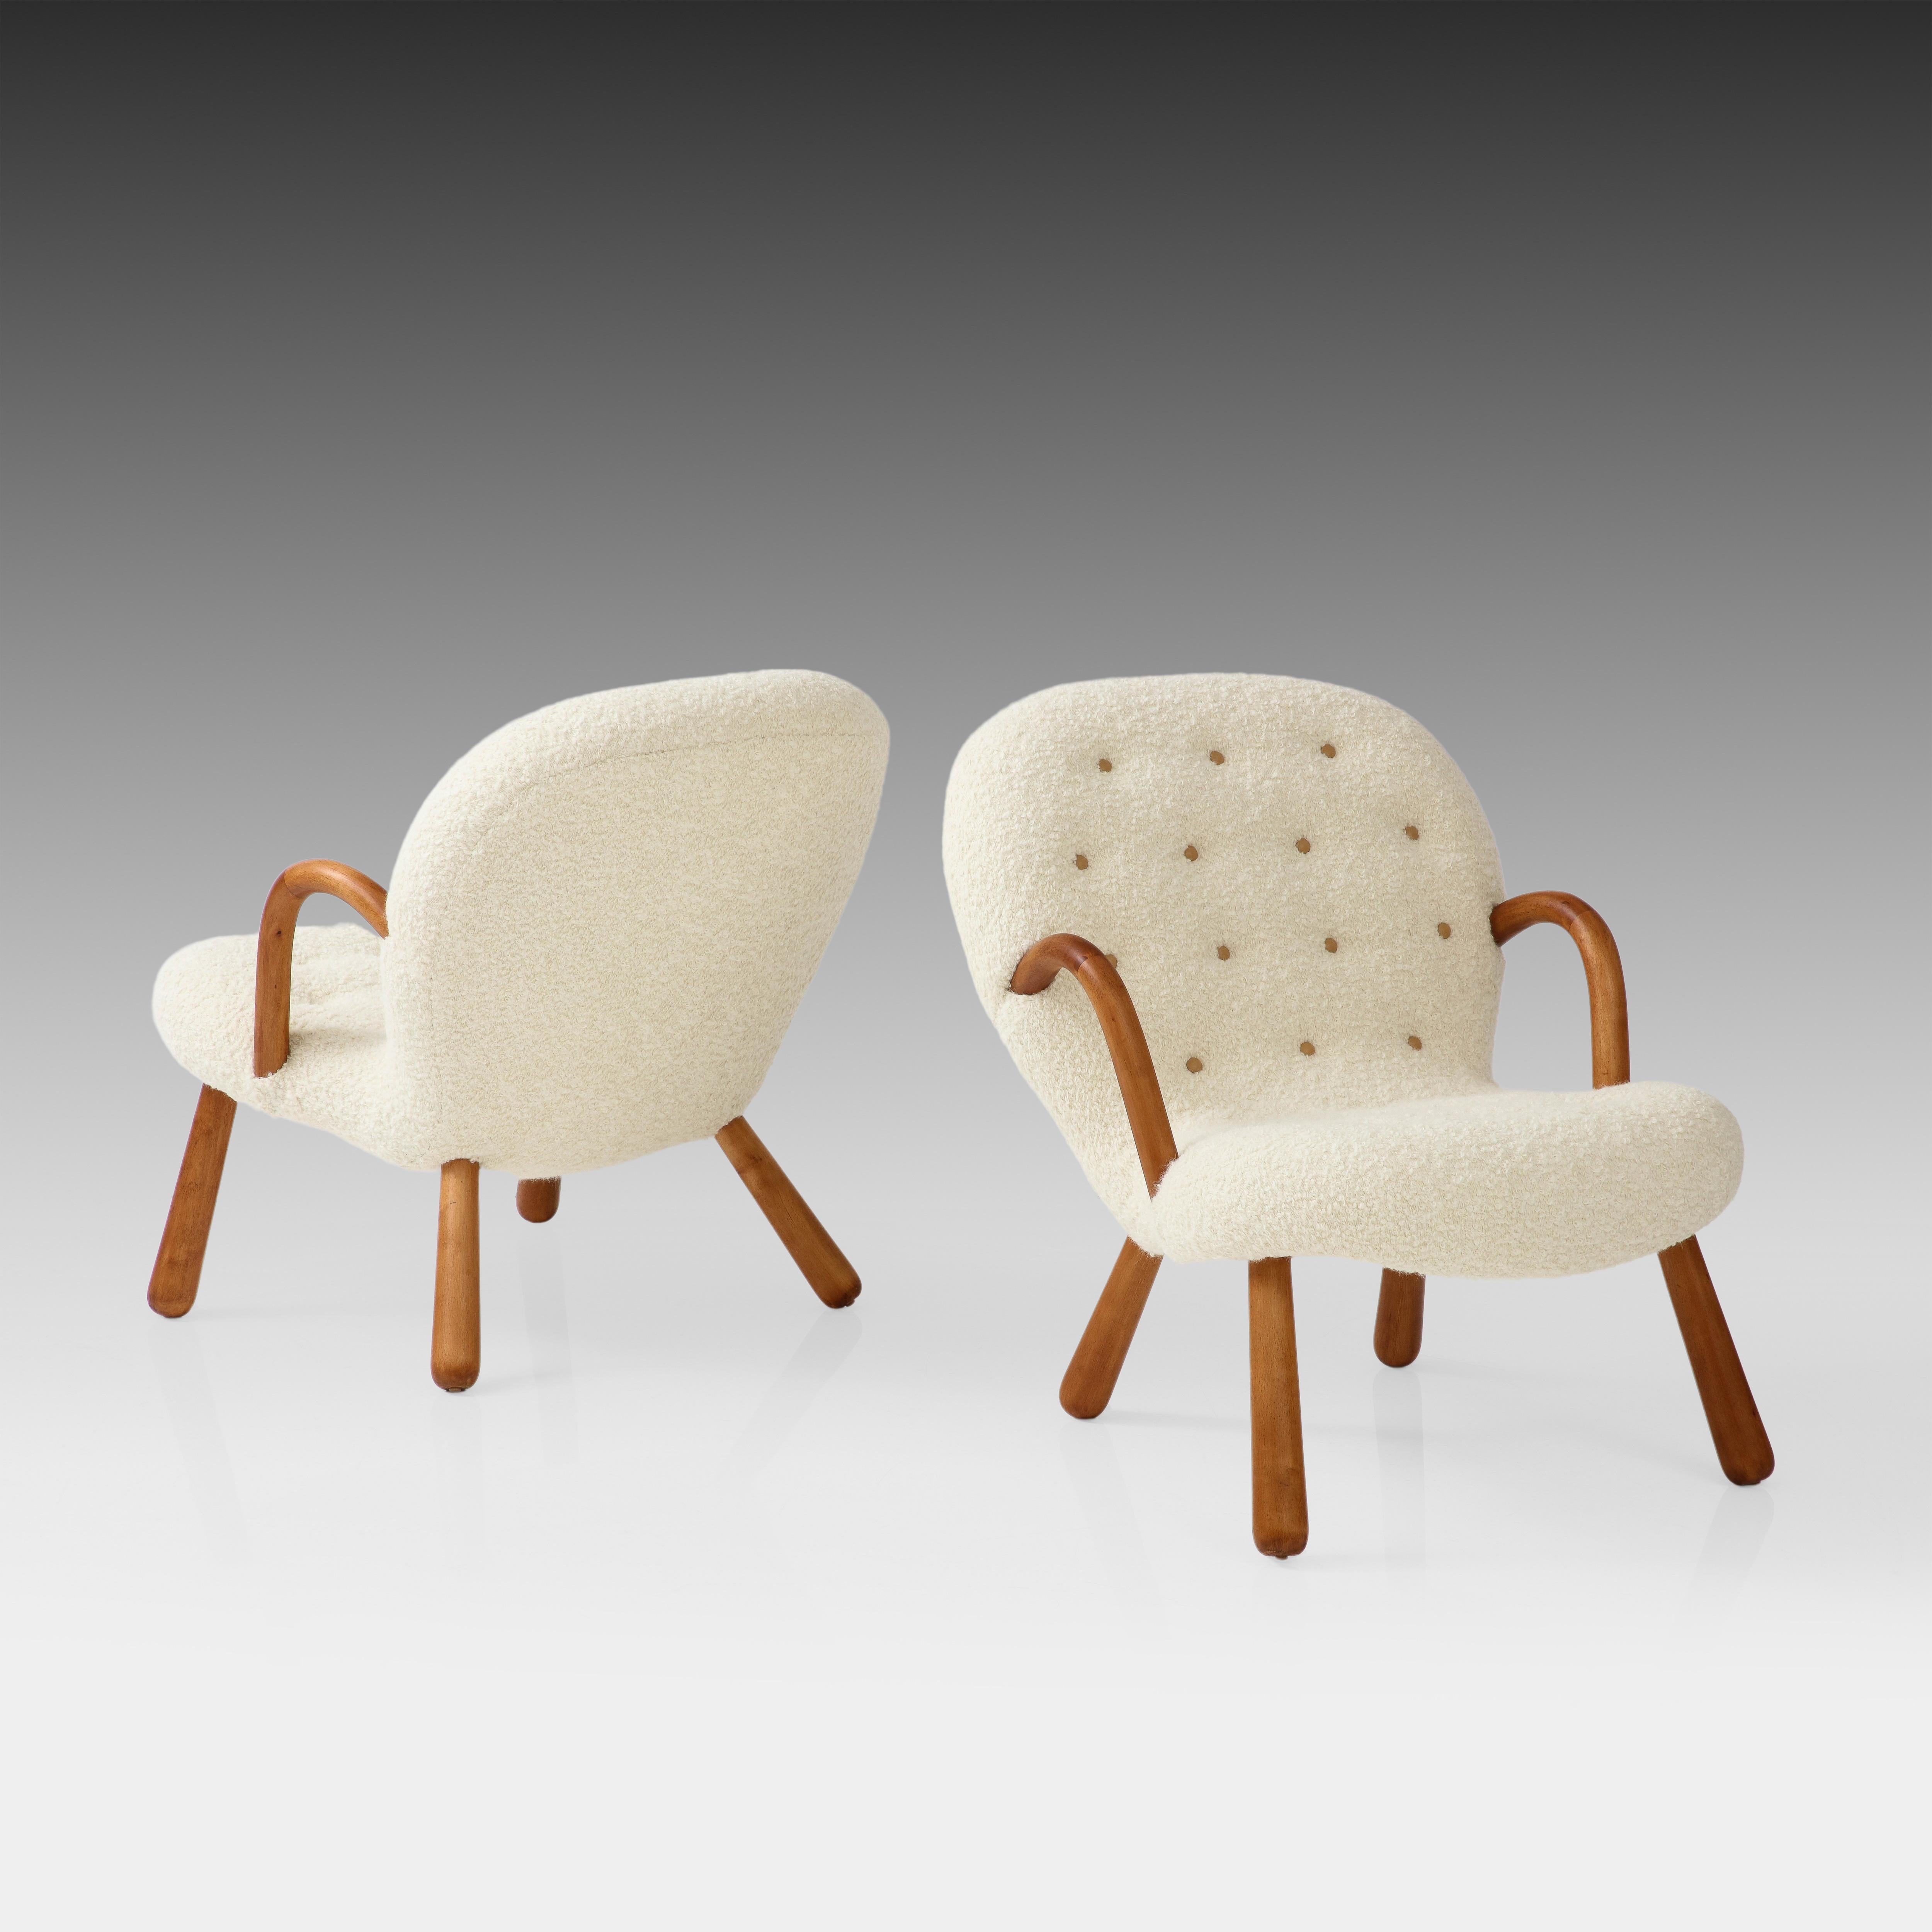 Arnold Madsen for Madsen & Schubell Rare Pair of Clam Chairs, Denmark, 1944 In Good Condition For Sale In New York, NY